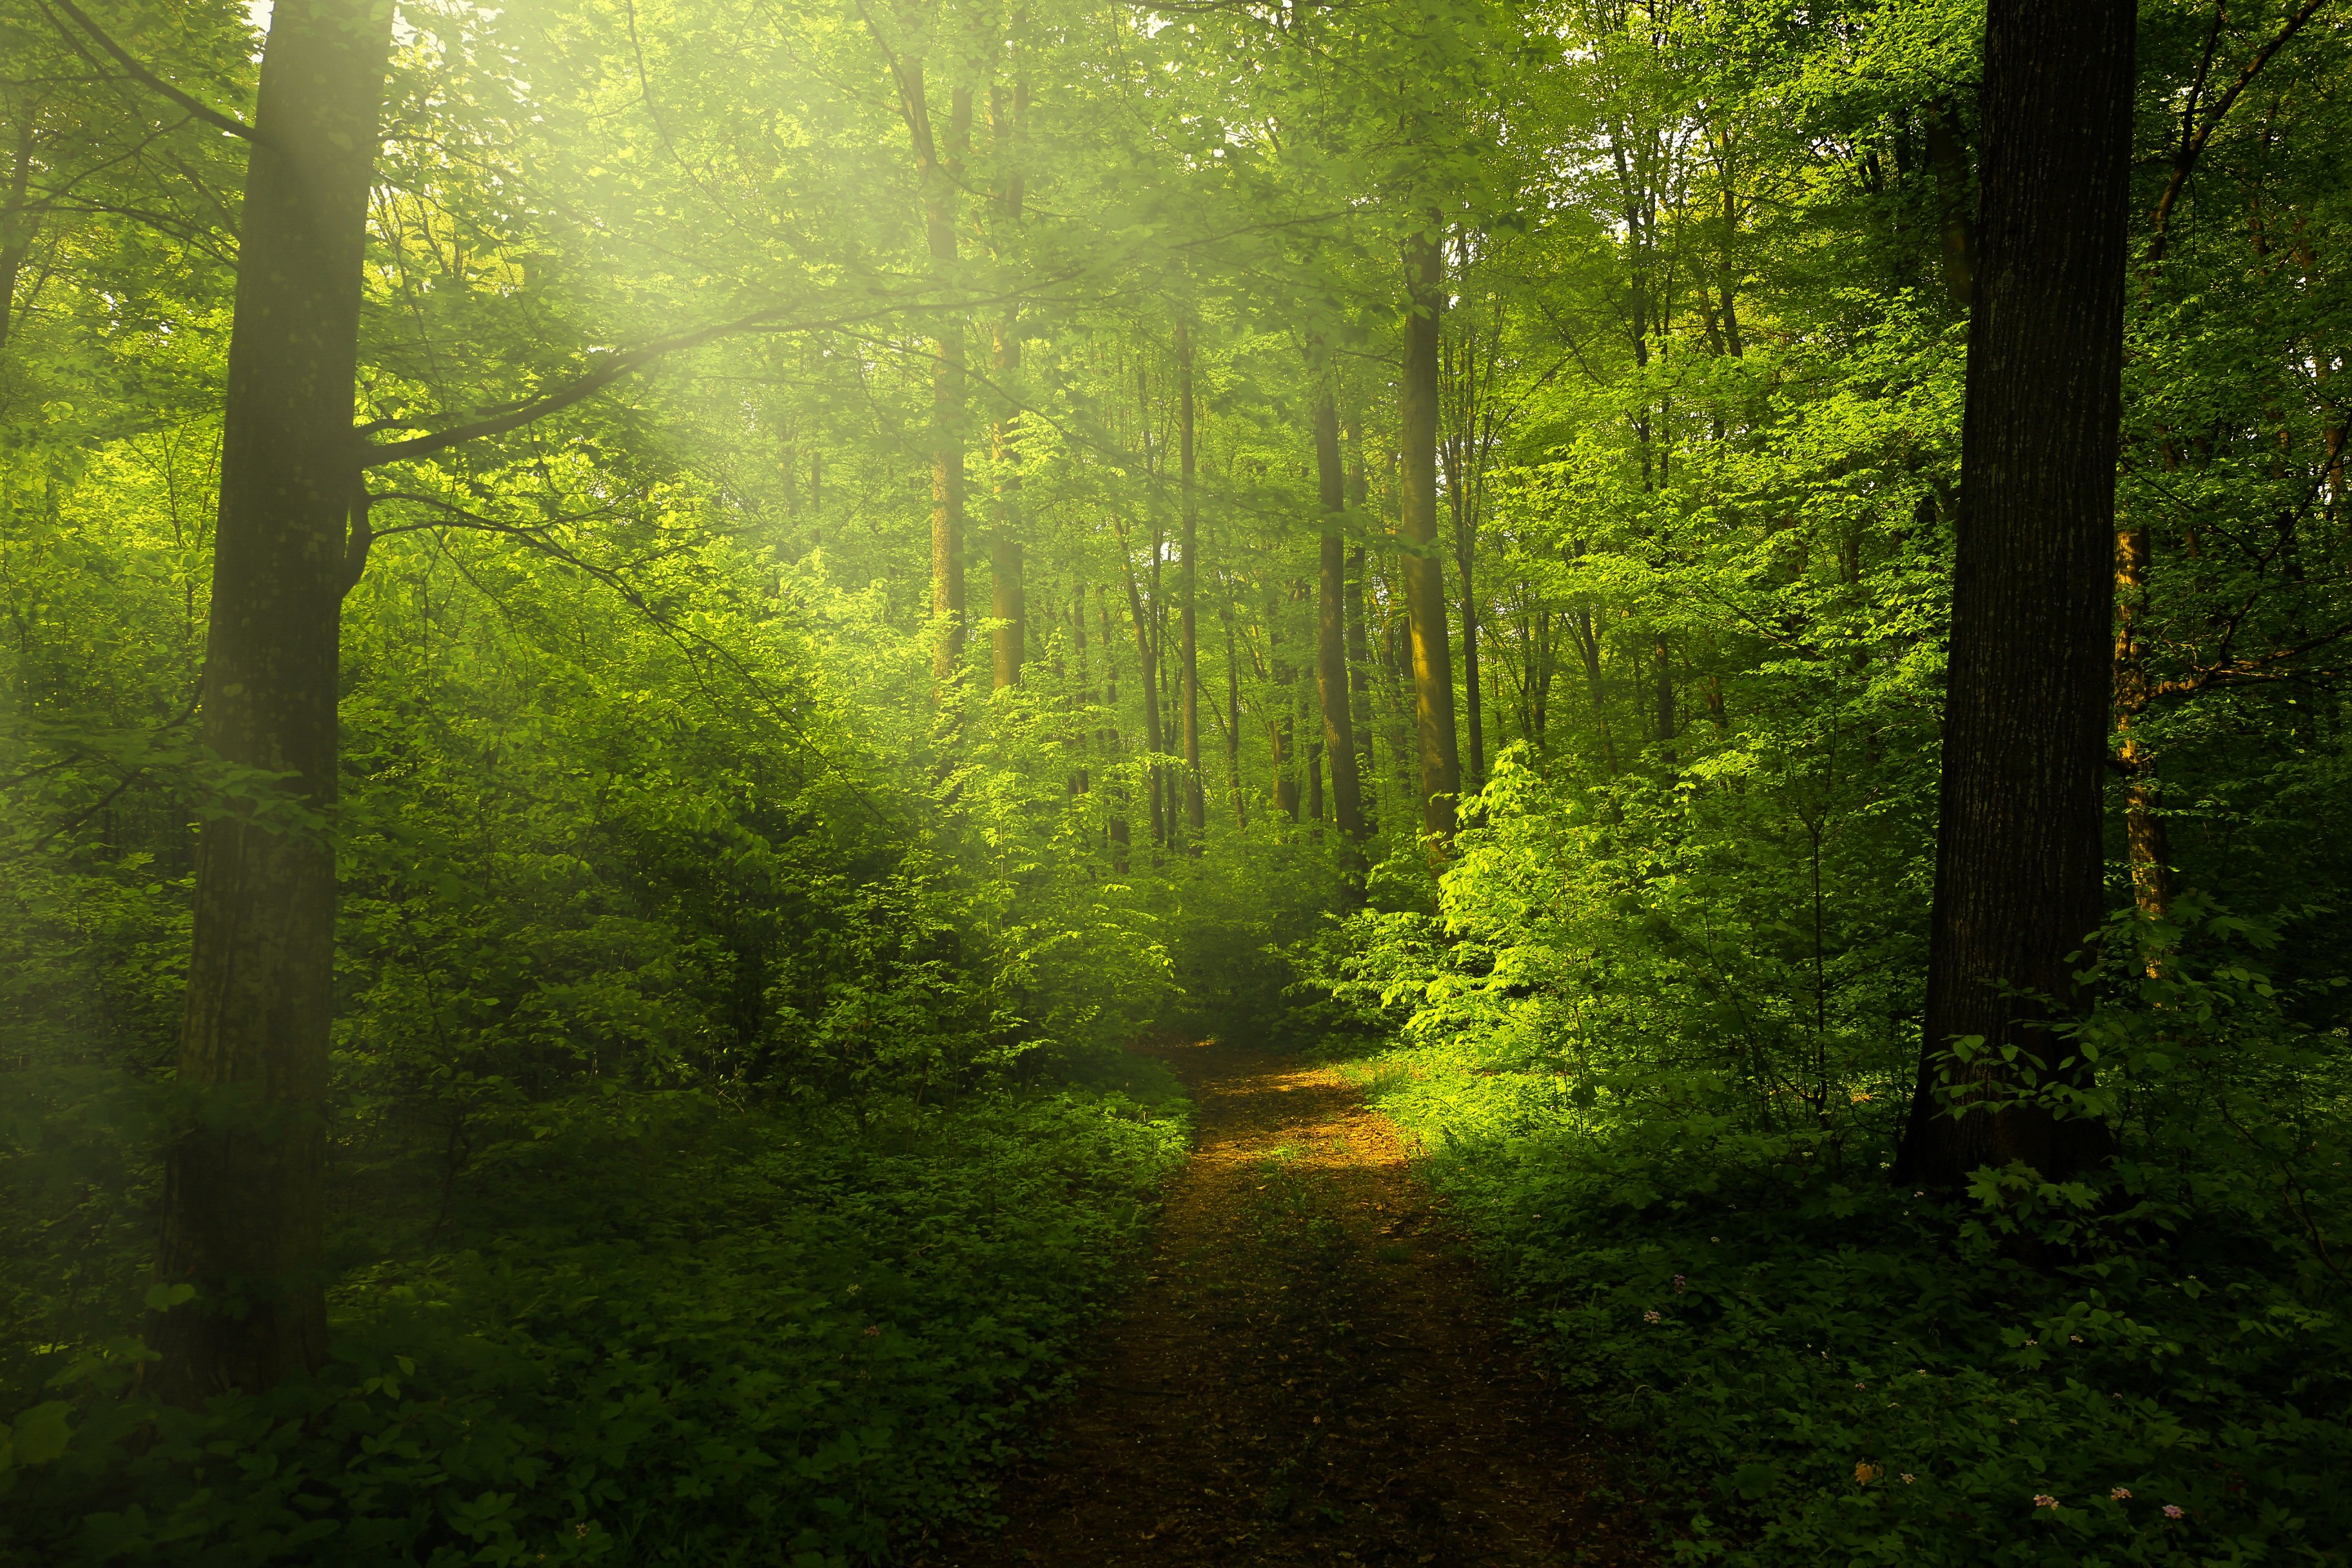 Green Forest Wallpaper 4K, Woods, Trails, Pathway, Nature, #5696